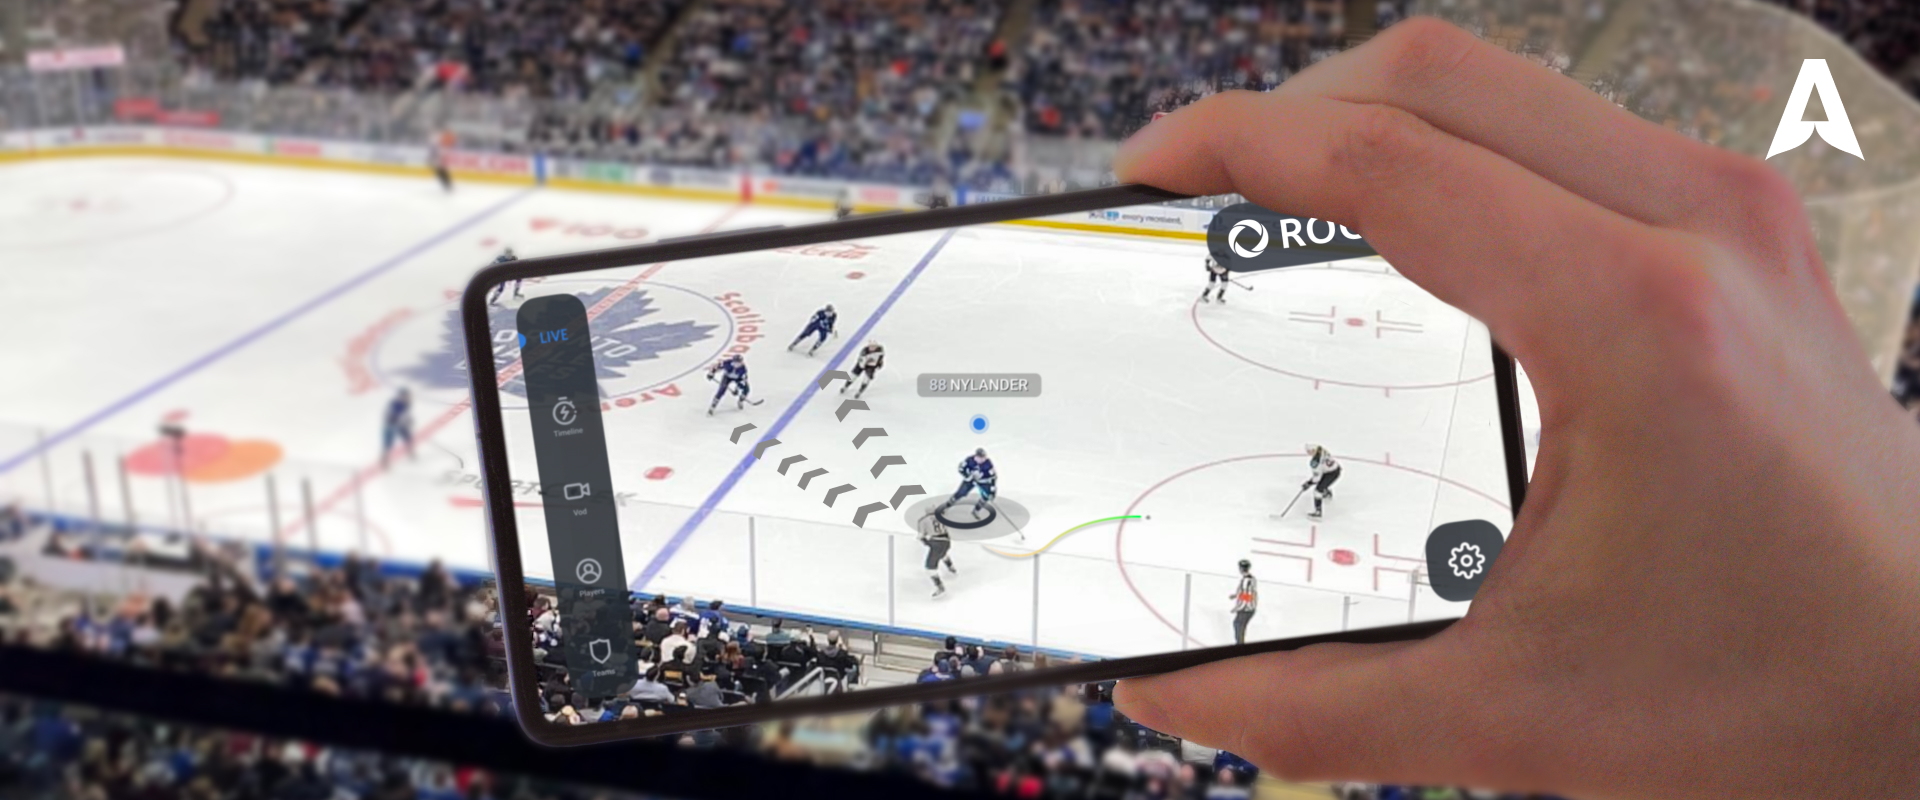 nhl maple leafs rogers ar augmented reality